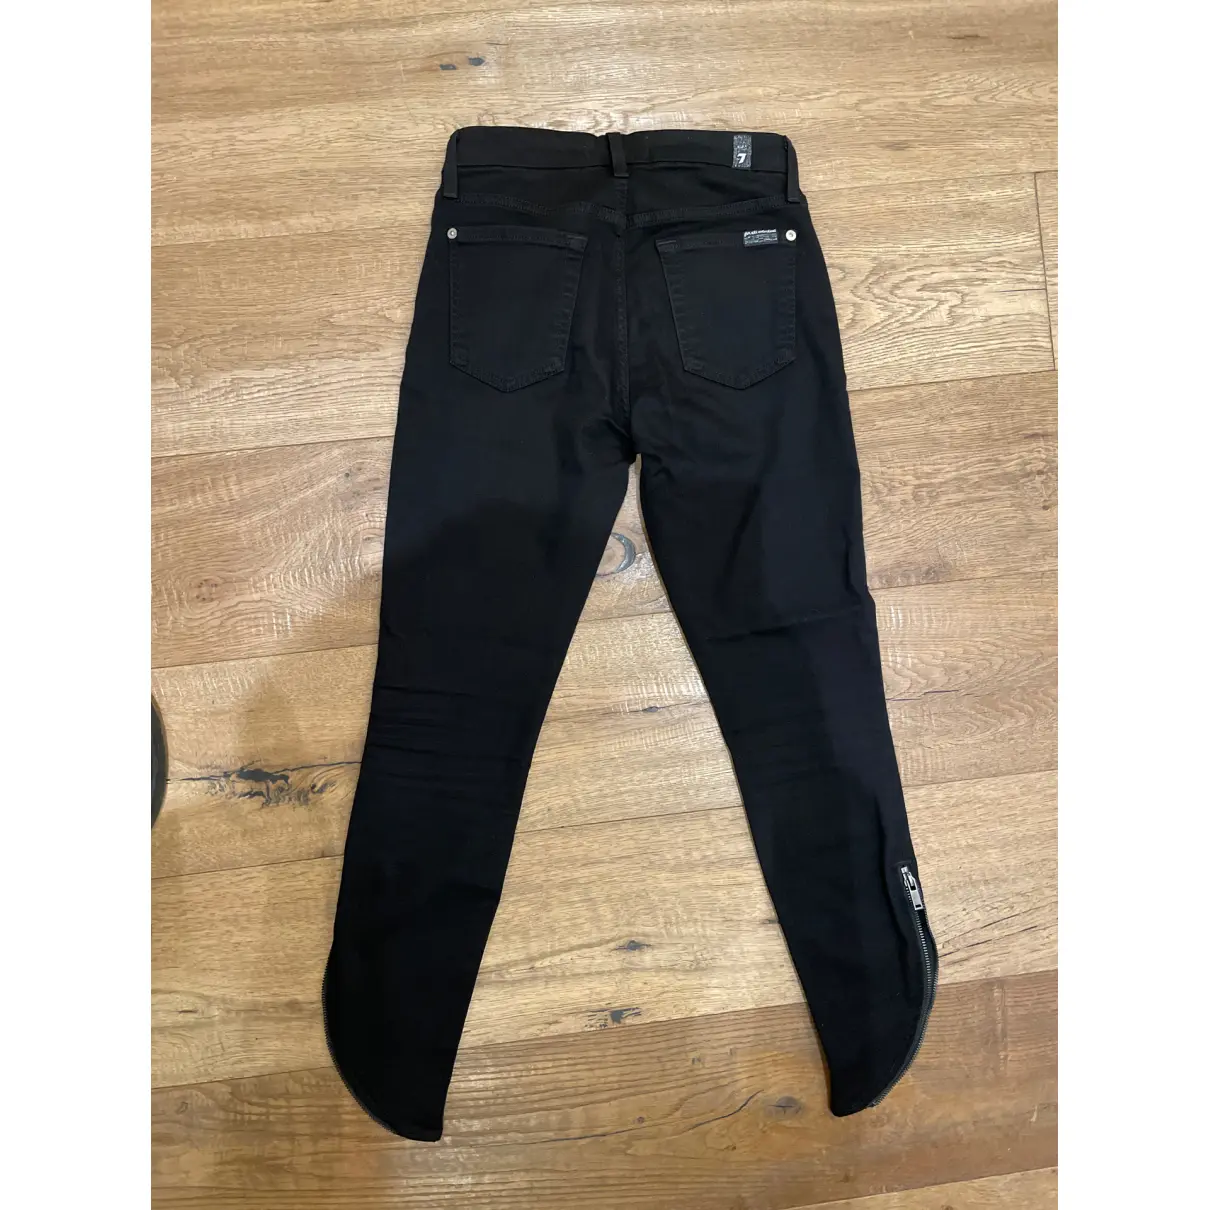 Buy 7 For All Mankind Slim jeans online